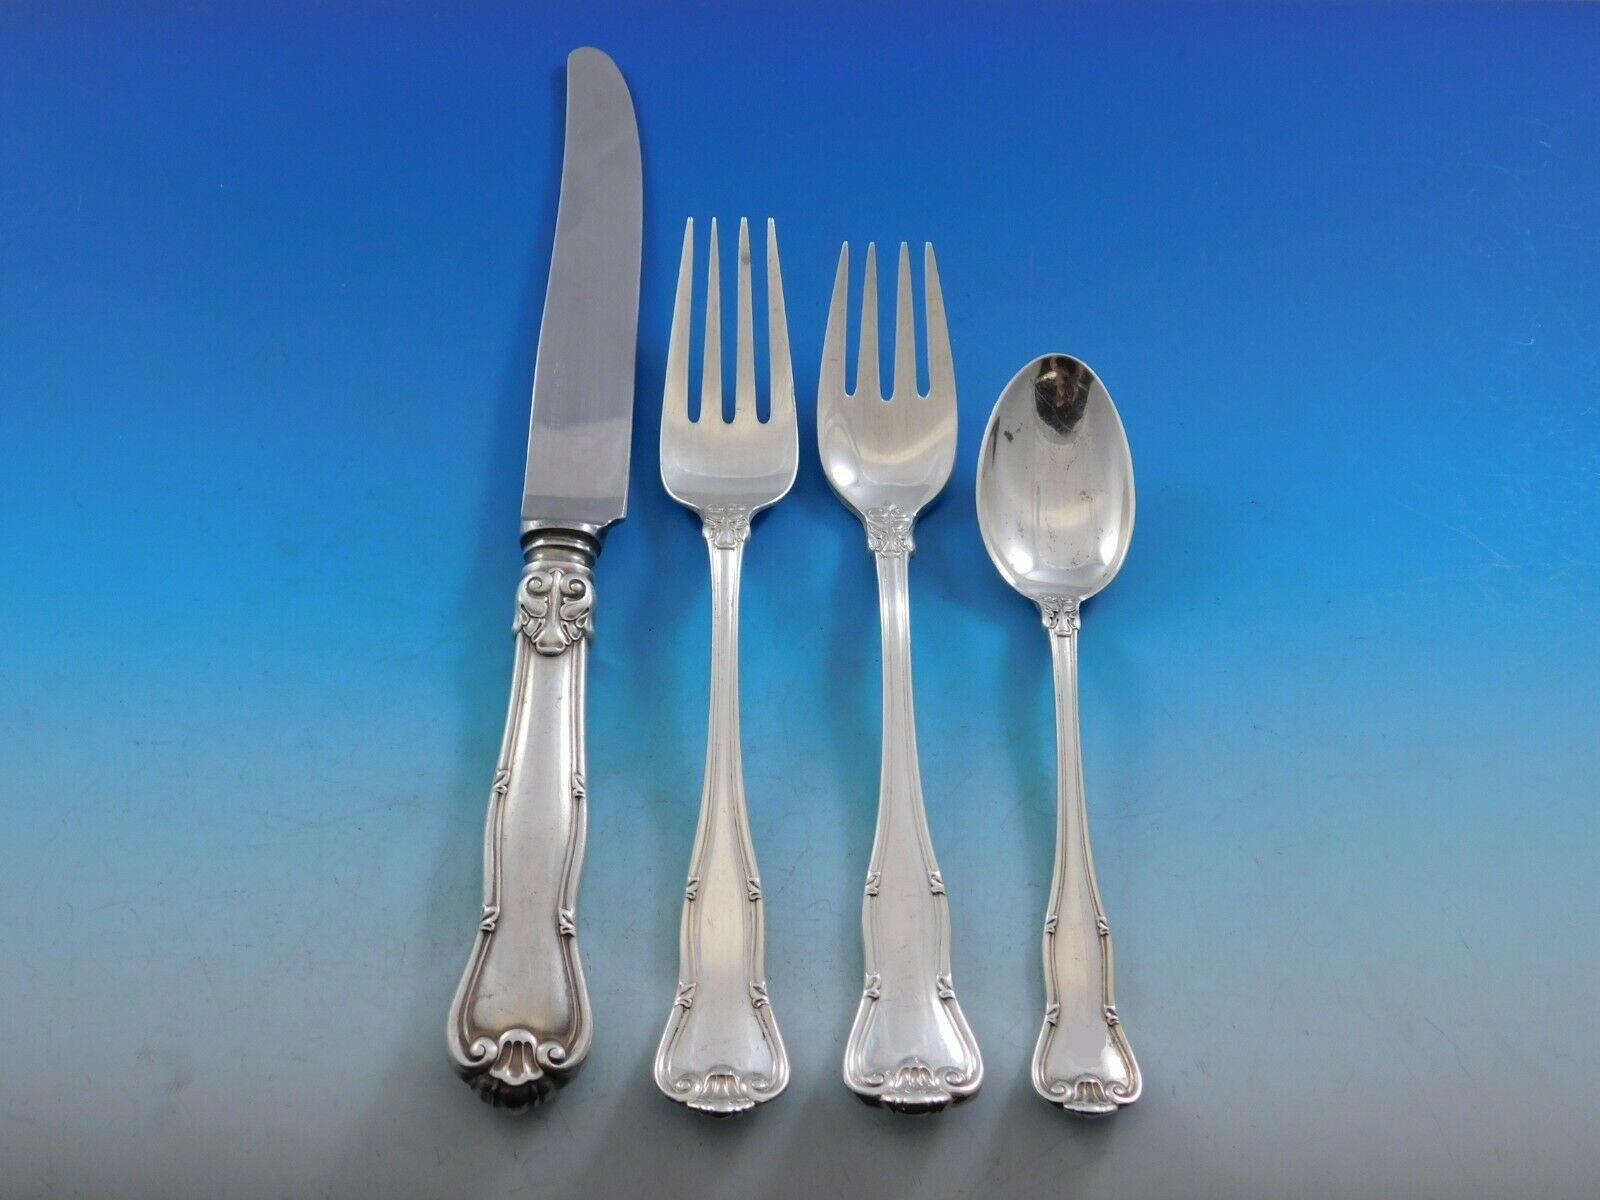 Dinner size provence by Tiffany & Co. sterling silver flatware set - 80 pieces. This set includes:

12 dinner size knives, 9 7/8